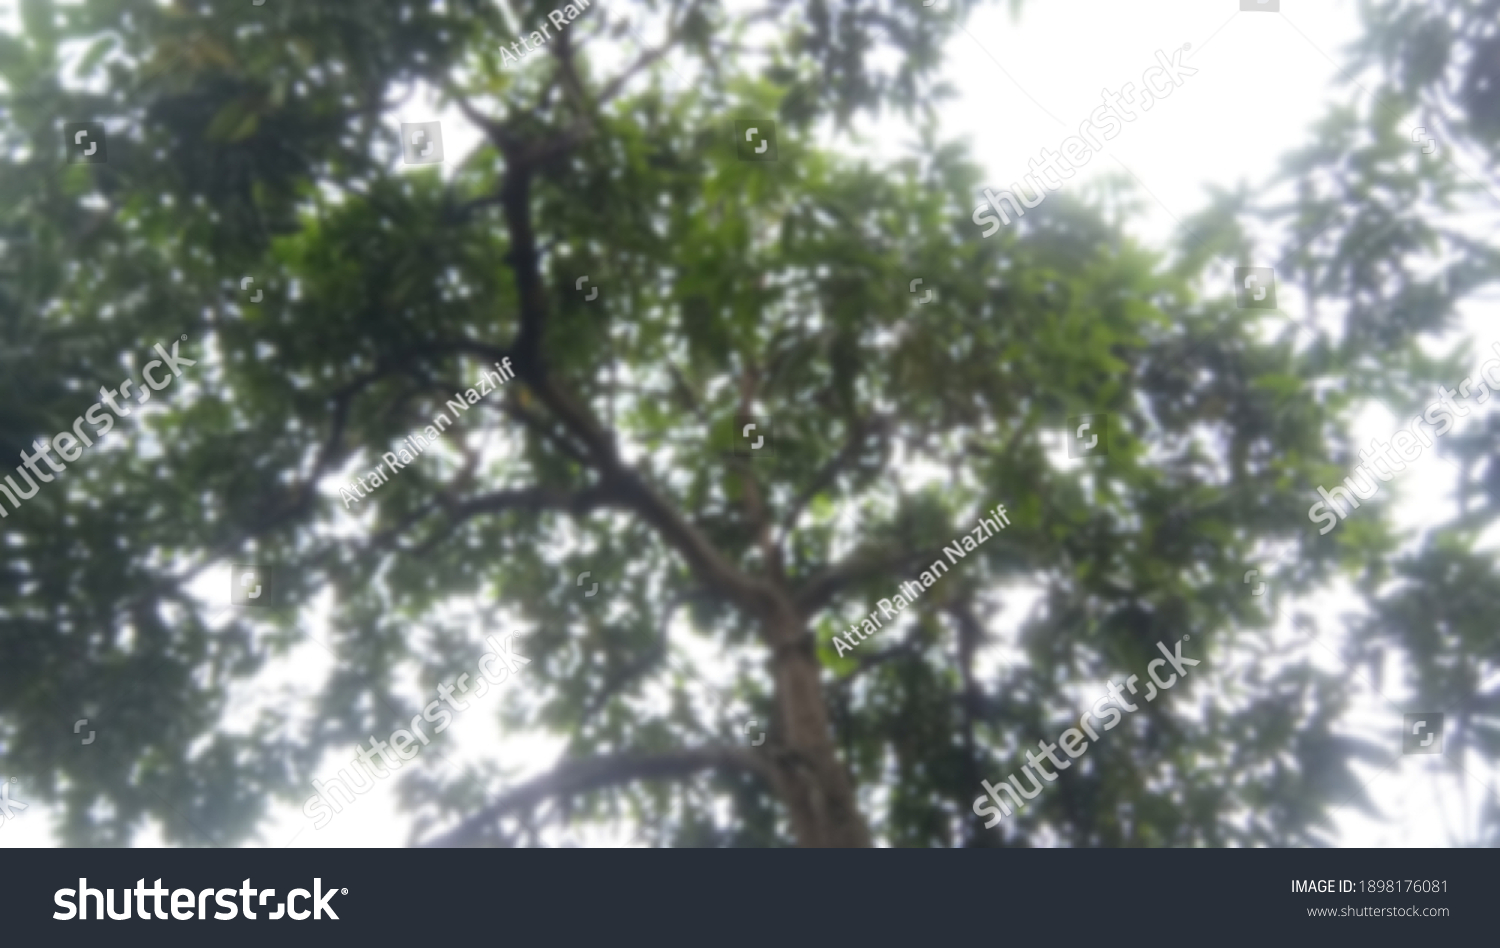 Blurred photo of a tree from the bottom view #1898176081